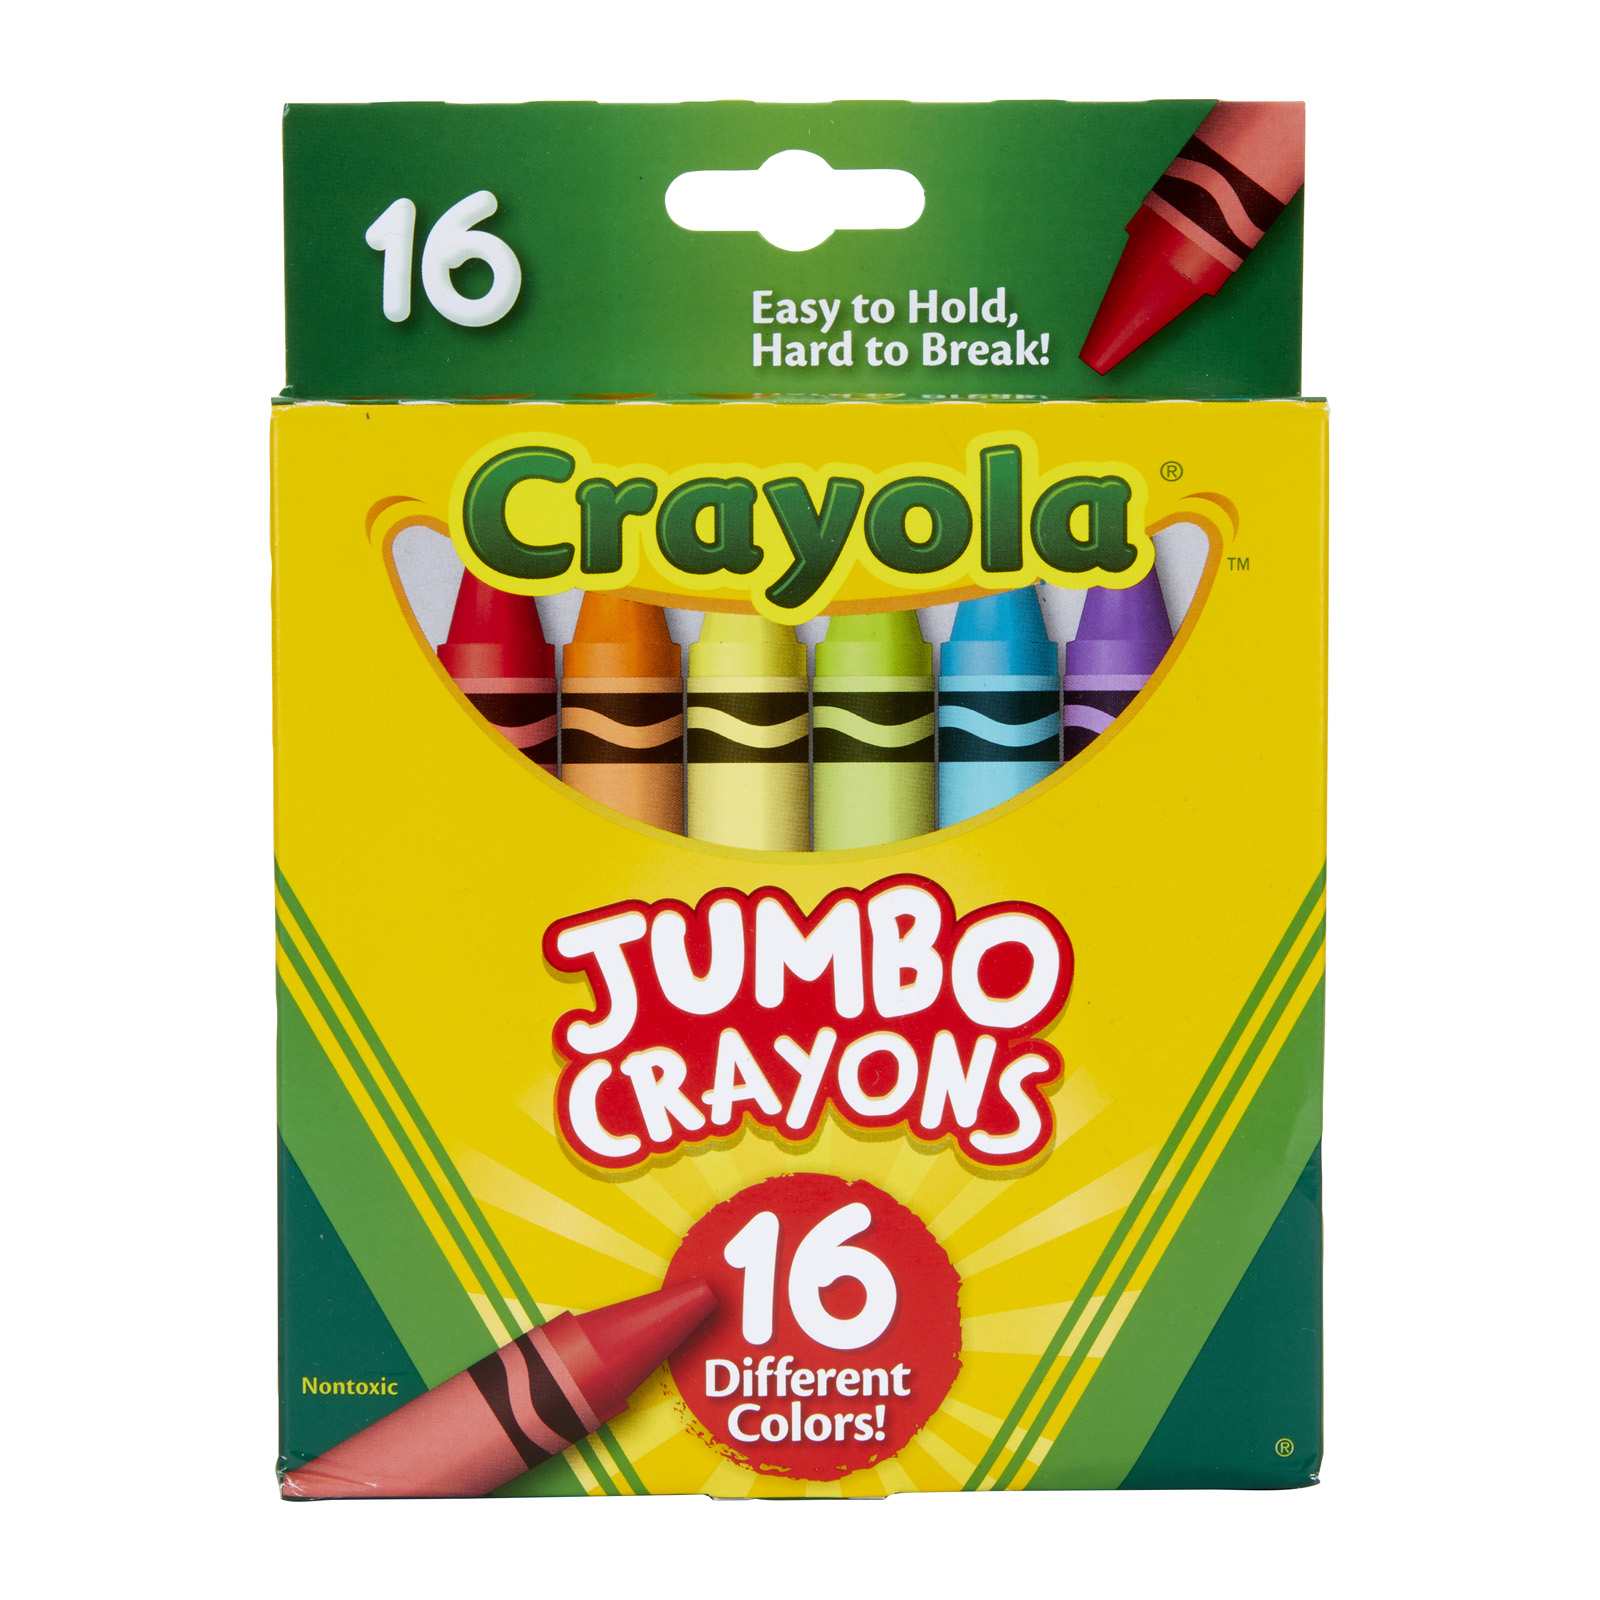 The Teachers' Lounge®  Large Crayons, Classic Colors, 16 Count